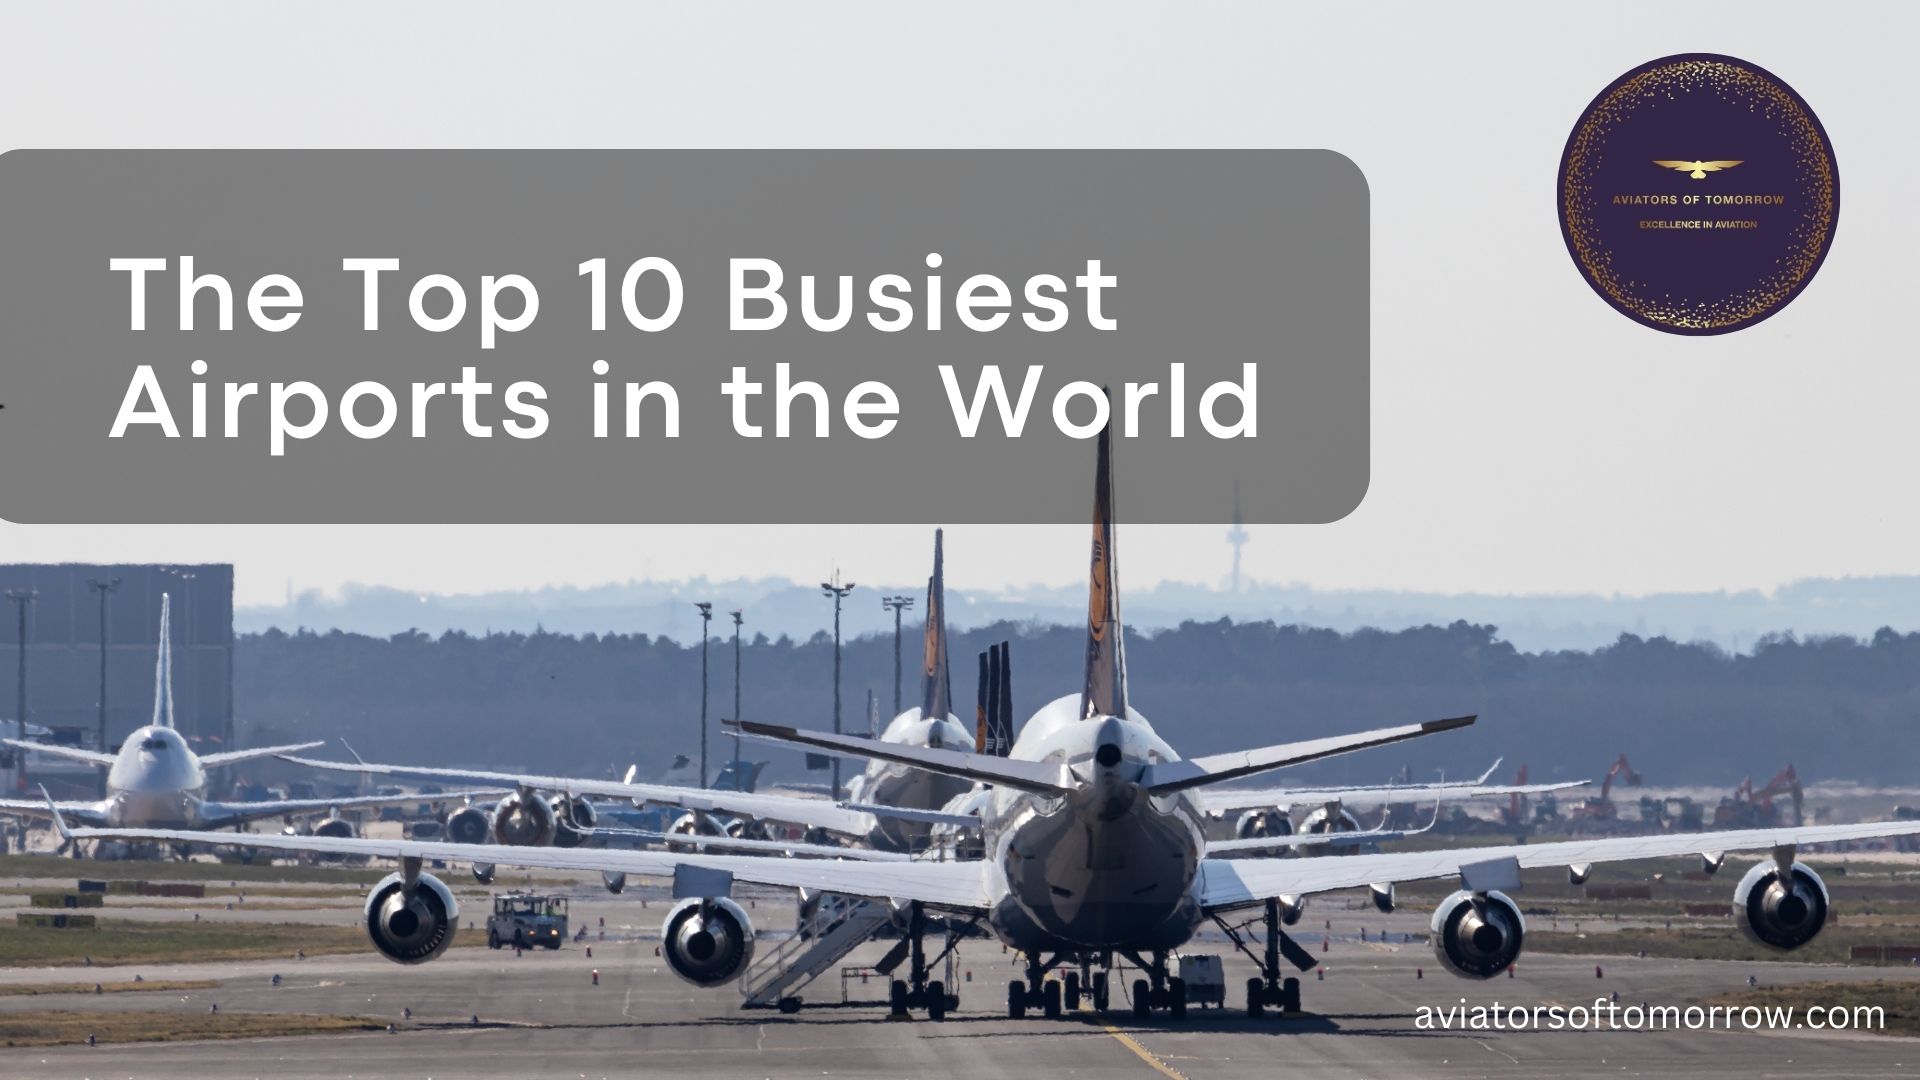 The Top 10 Busiest Airports in the World